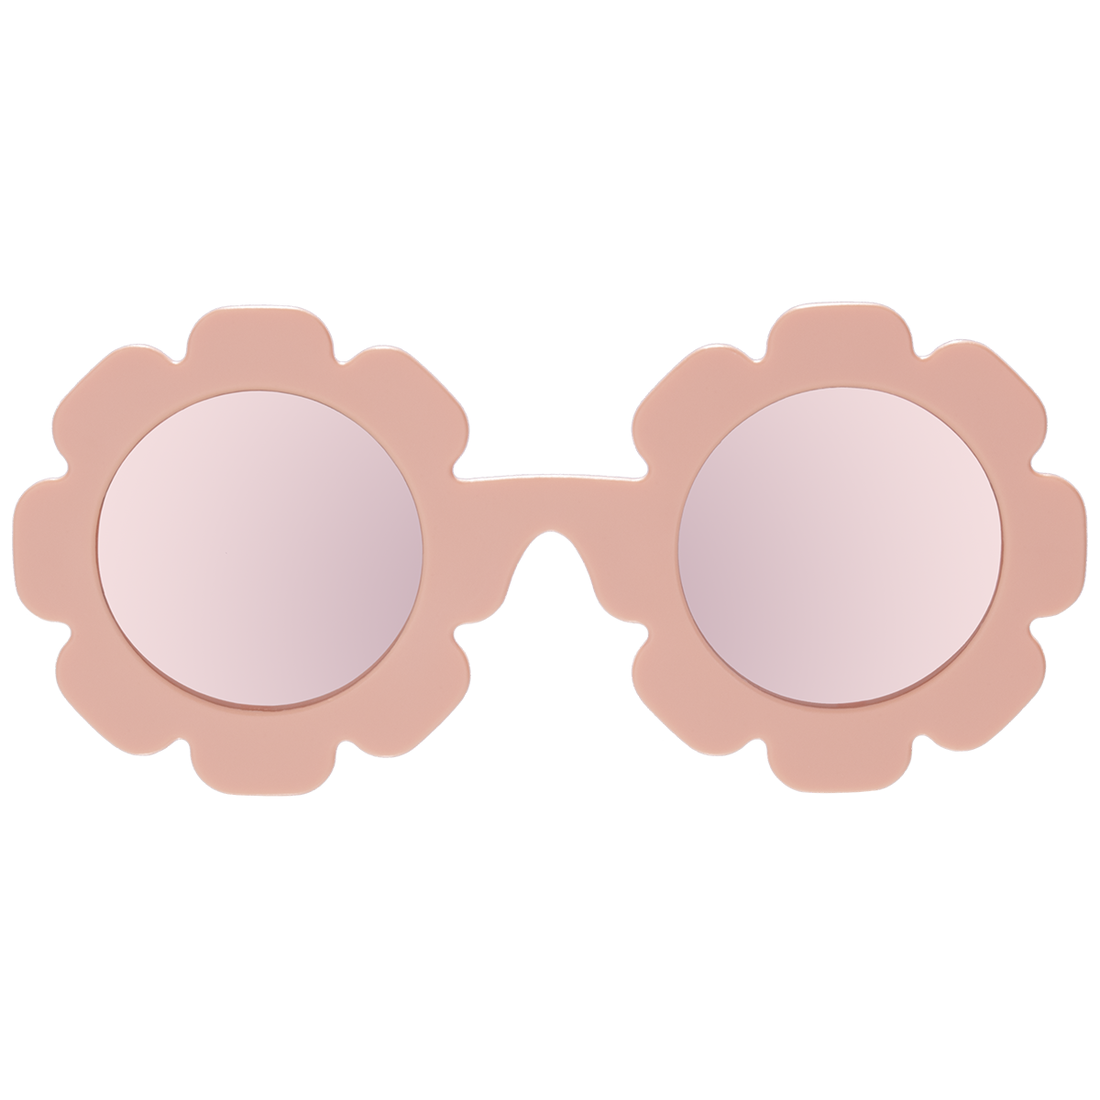 The Flower Child Pink with Polarized Mirrored Lenses